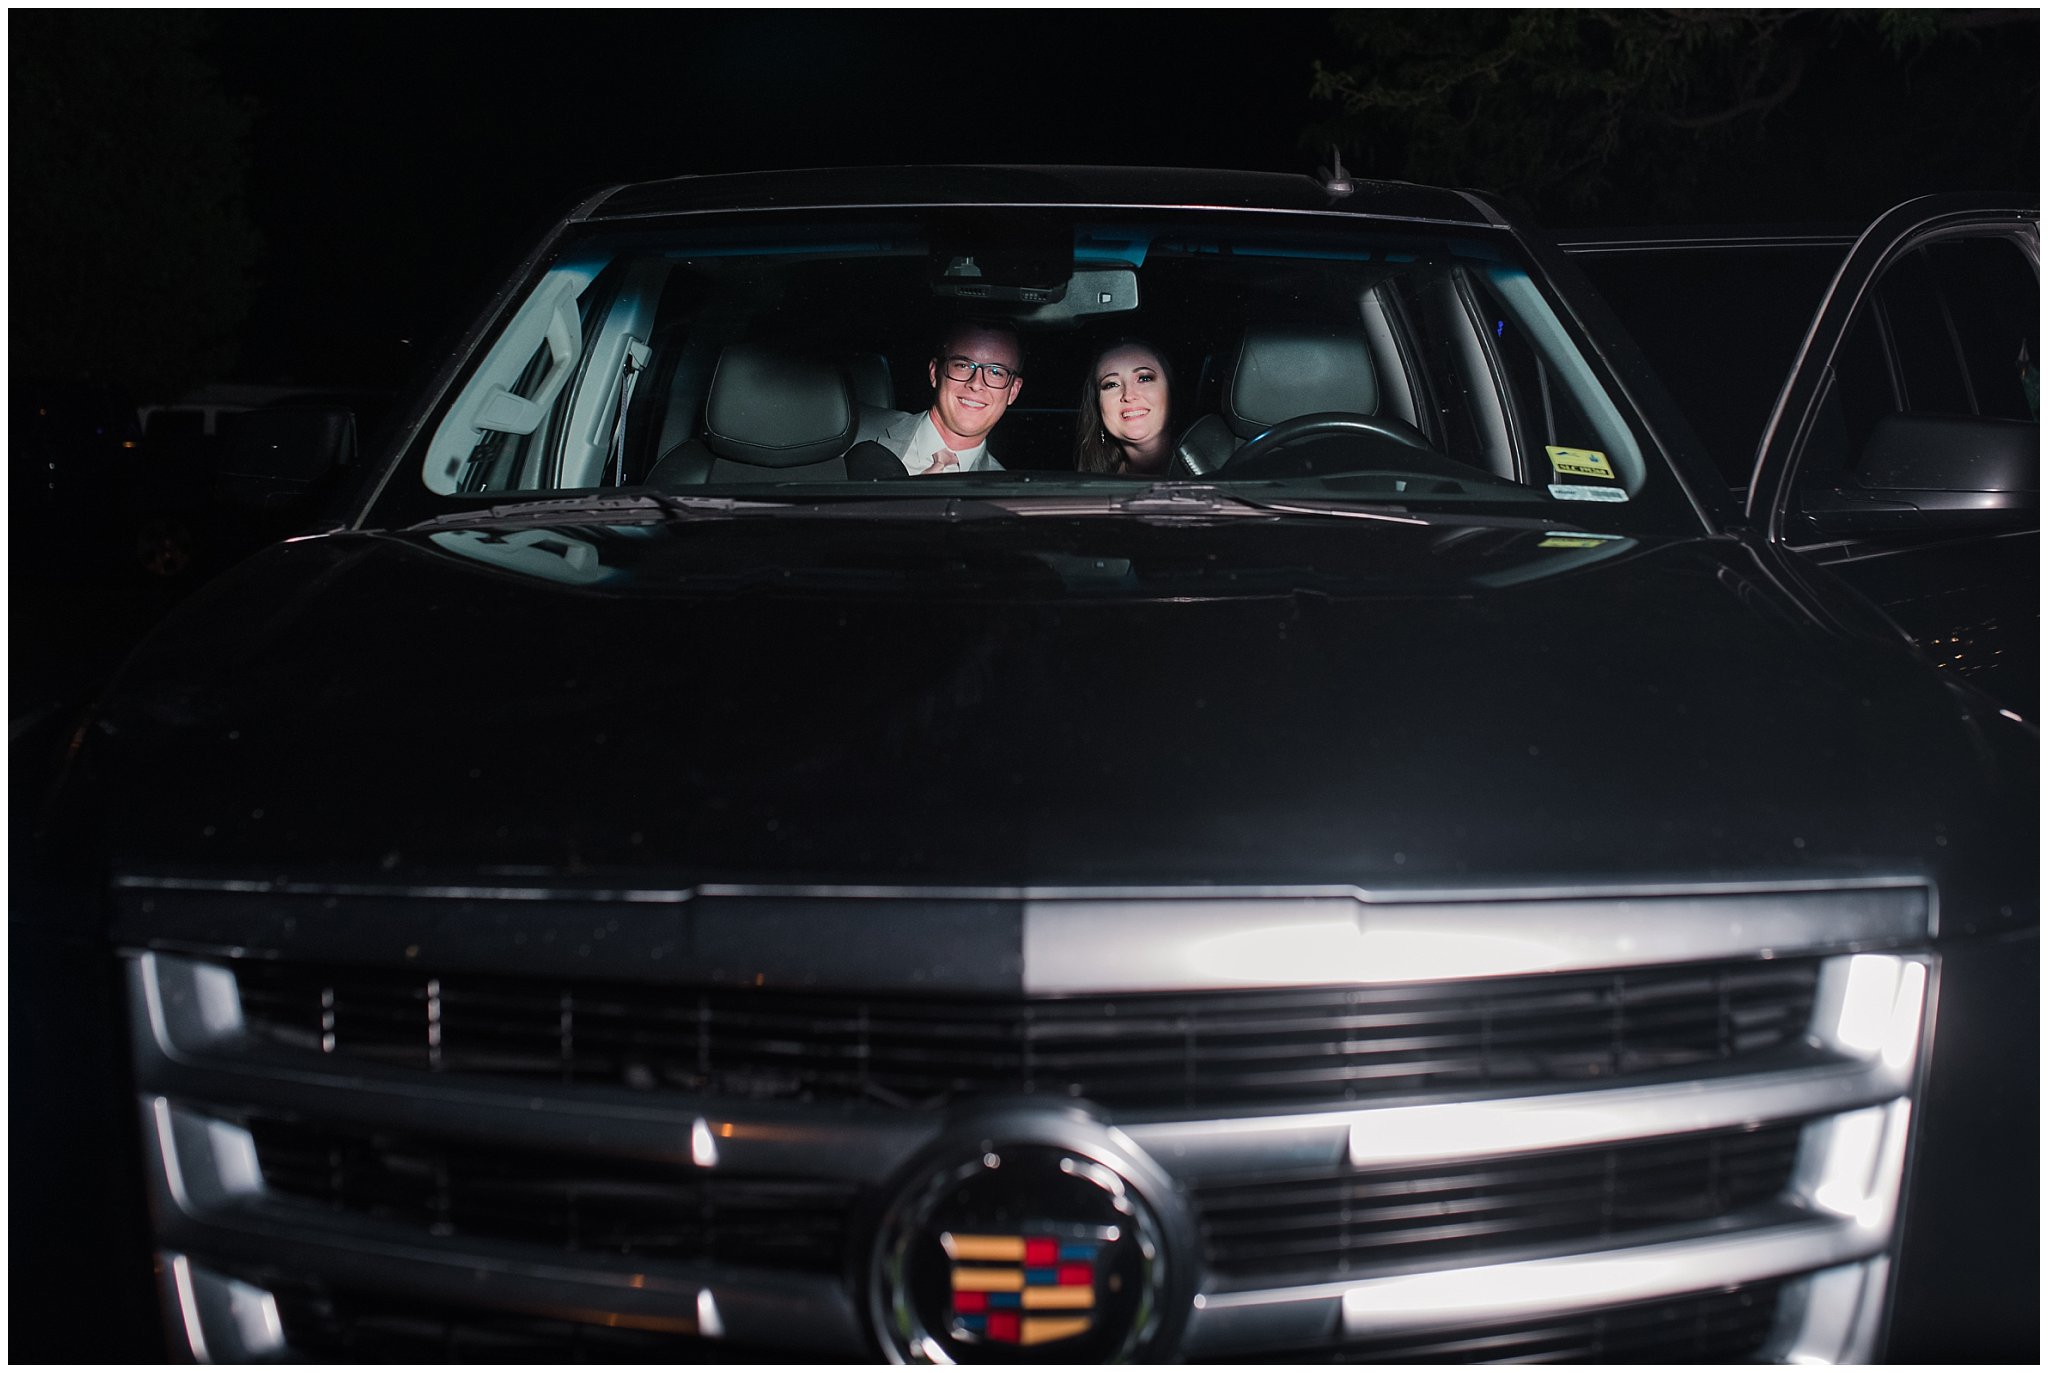 Getaway Cadillac limo | Oak Hills Utah Dusty Rose and Gray Summer Wedding | Jessie and Dallin Photography